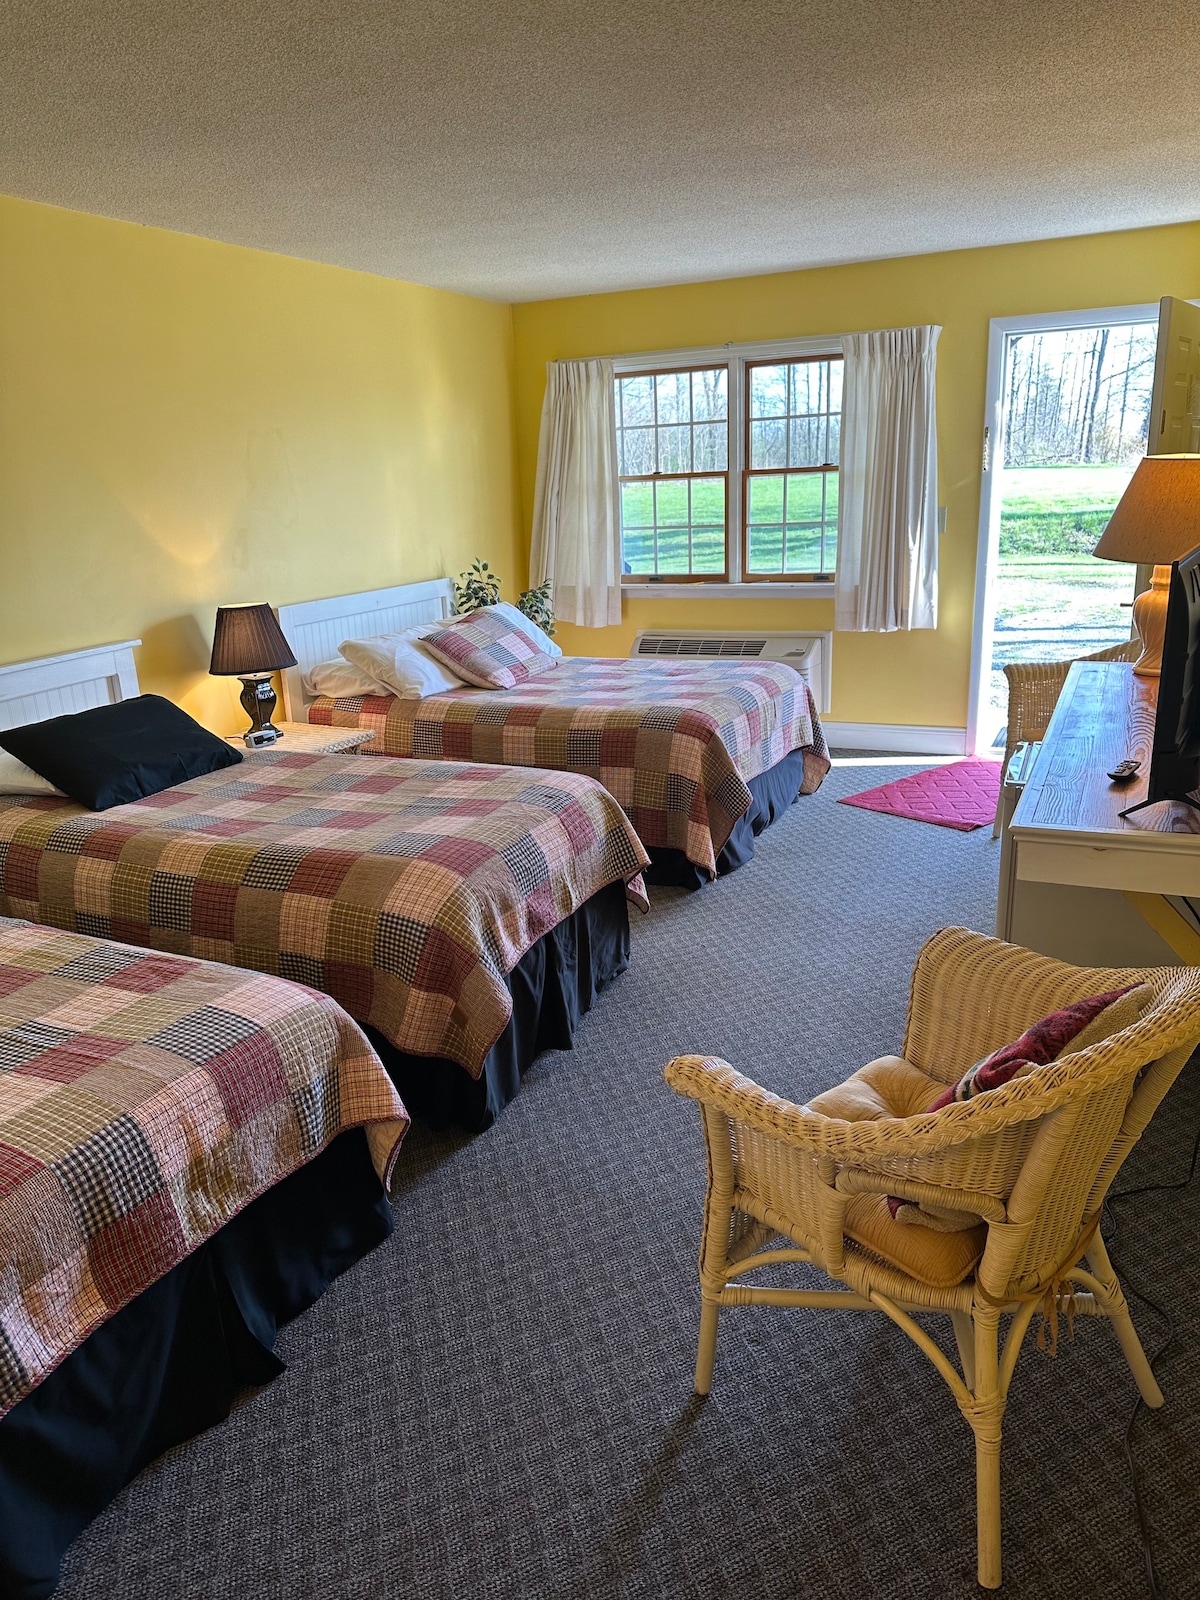 The Aspinwall Motel (3 Beds - No cleaning fees)